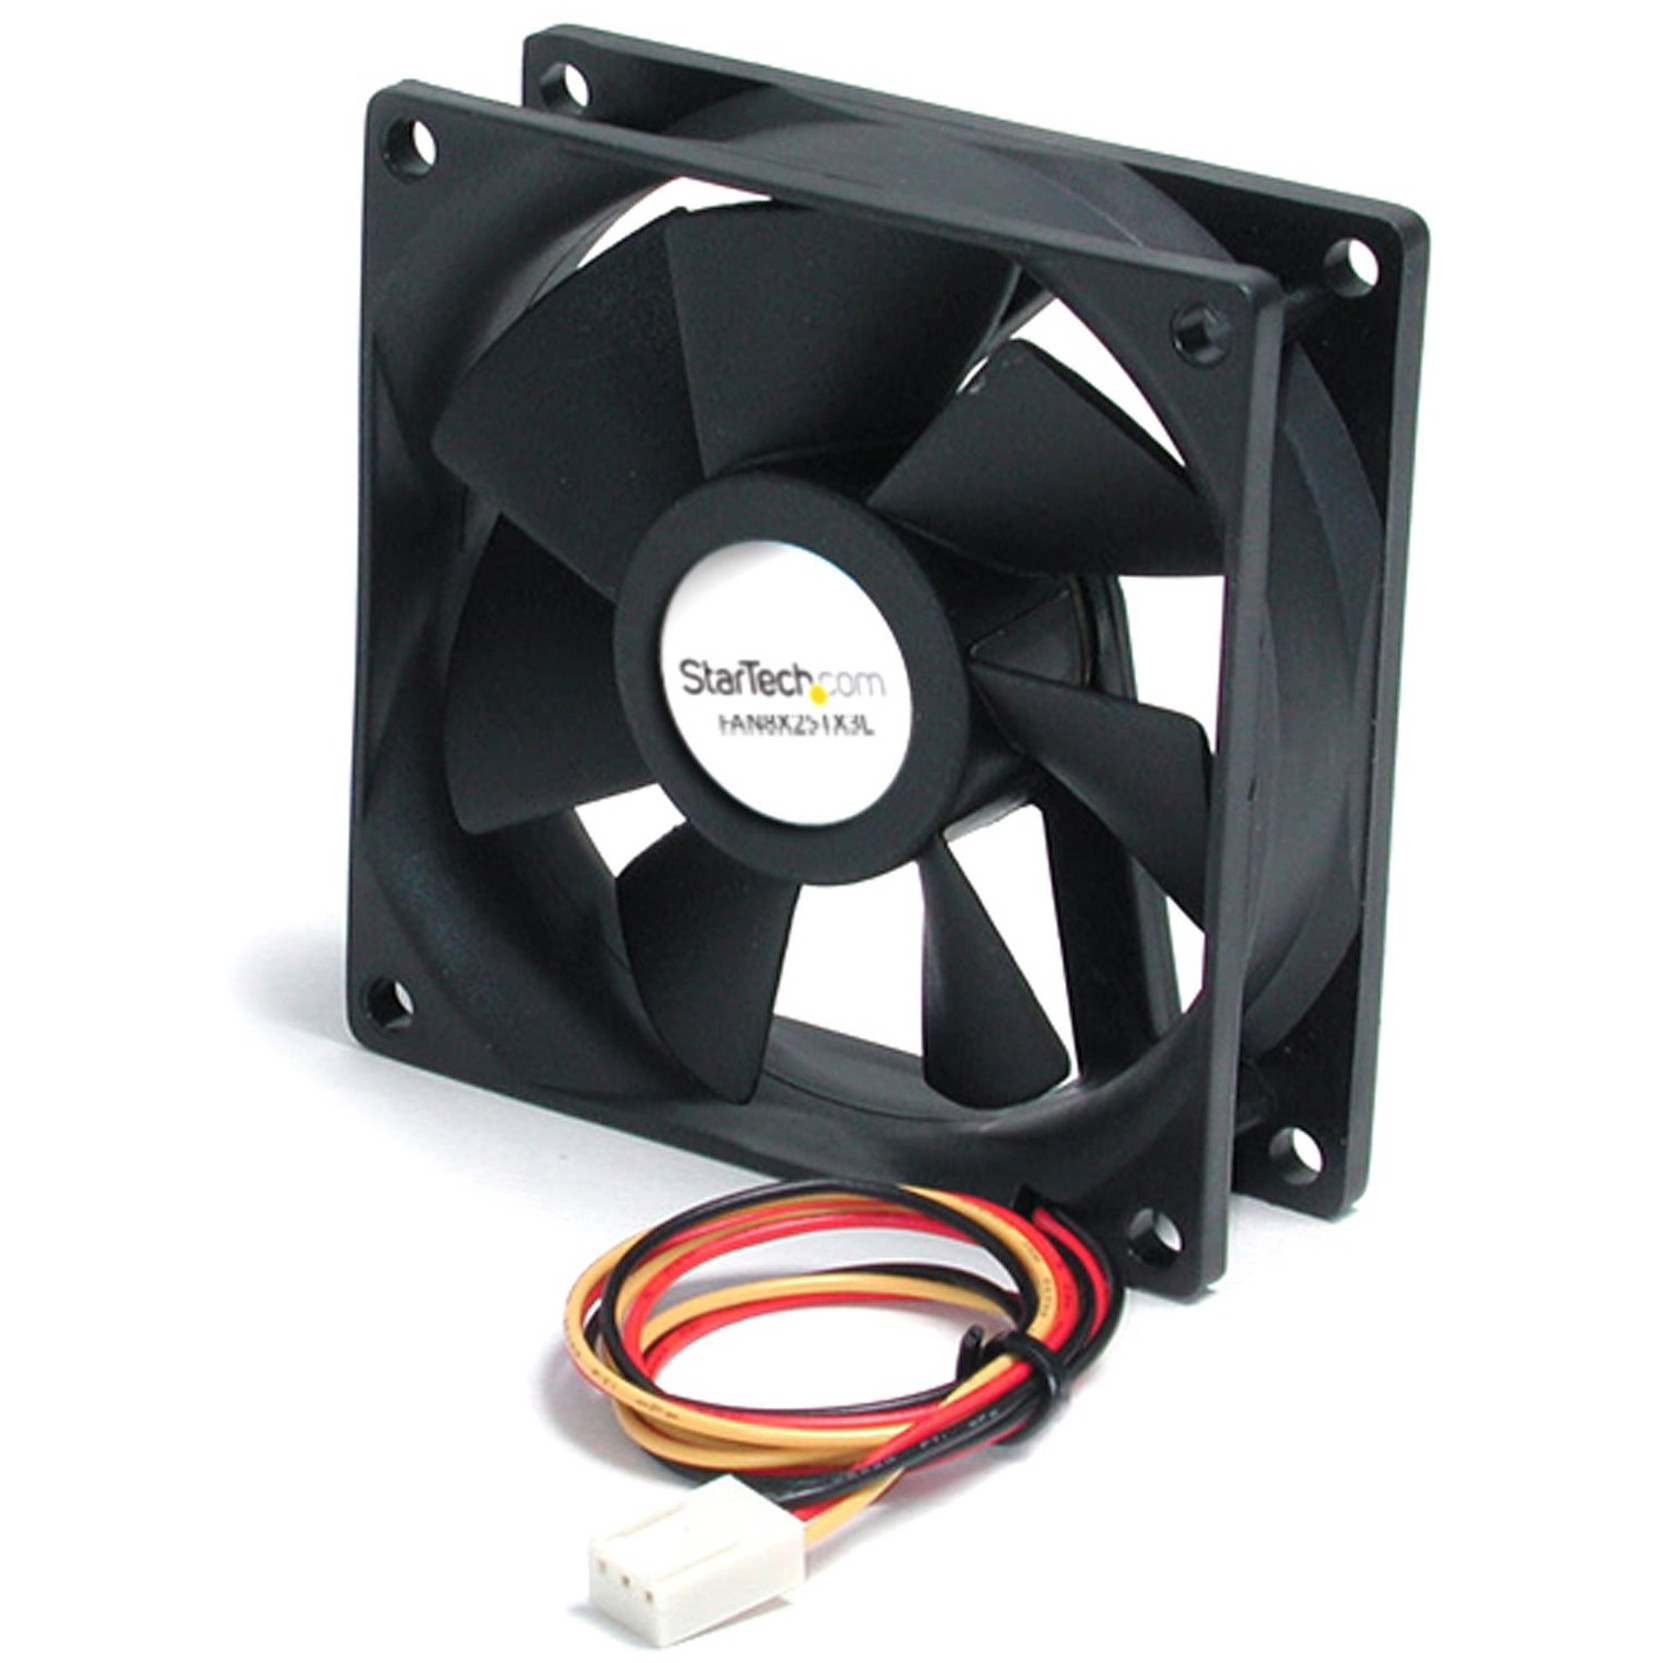 Startech .com 80x25mm Ball Bearing Quiet Computer Case Fan w/ TX3 ConnectorFan additional chassis cooling with a 80mm ball beari... FAN8X25TX3L - Corporate Armor